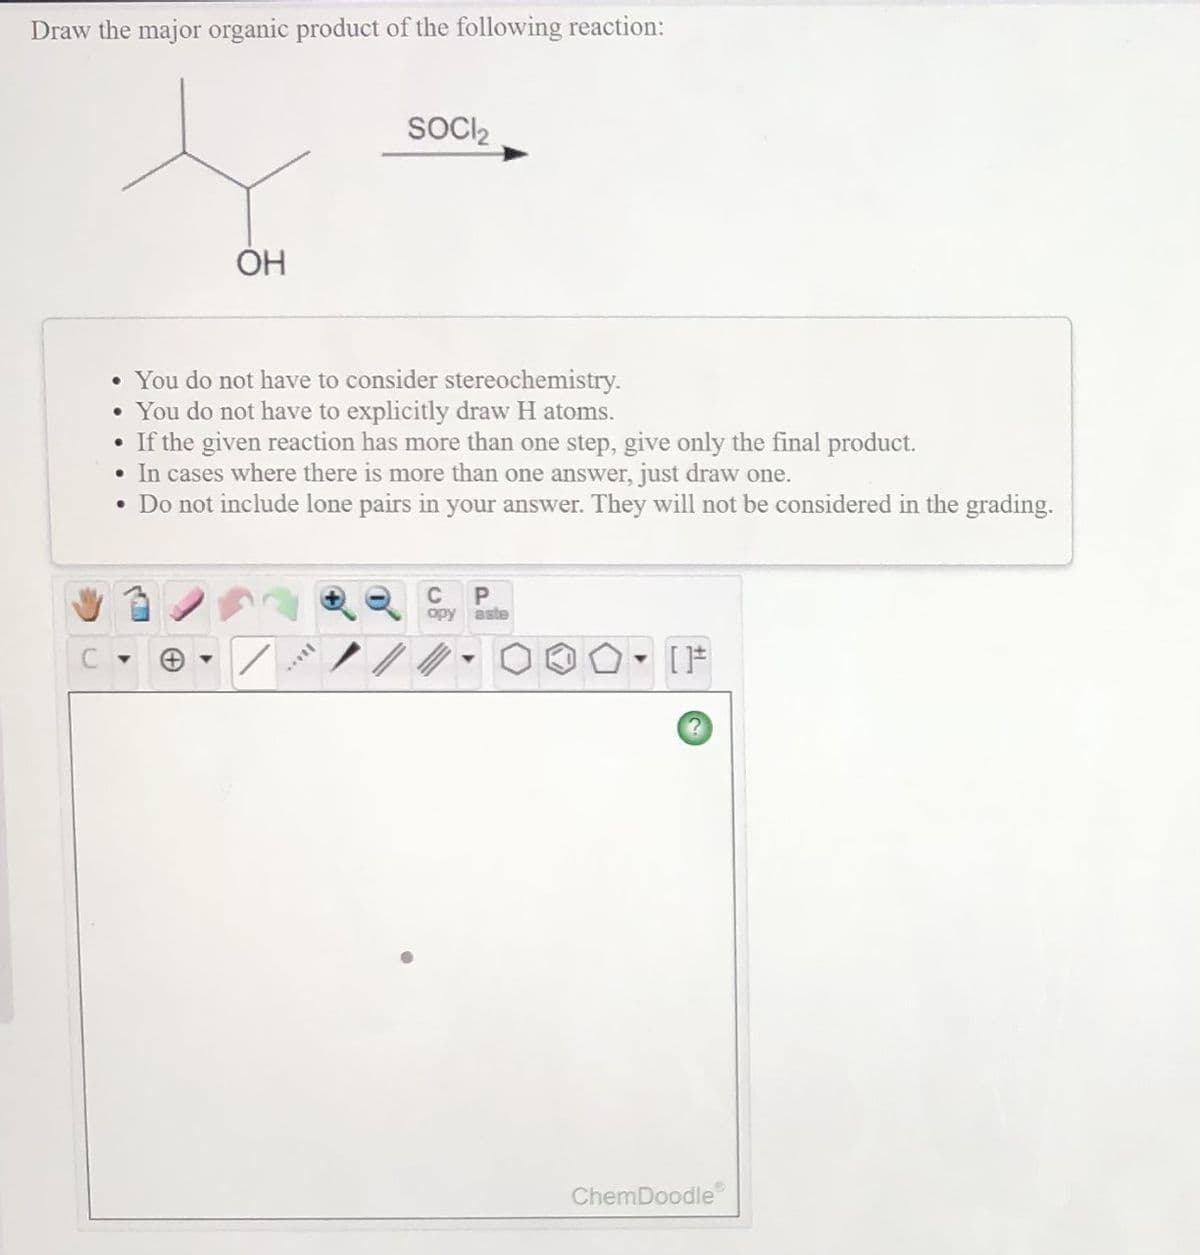 Draw the major organic product of the following reaction:
SOCI,
OH
• You do not have to consider stereochemistry.
• You do not have to explicitly draw H atoms.
• If the given reaction has more than one step, give only the final product.
• In cases where there is more than one answer, just draw one.
• Do not include lone pairs in your answer. They will not be considered in the grading.
C
P
opy aste
ChemDoodle
